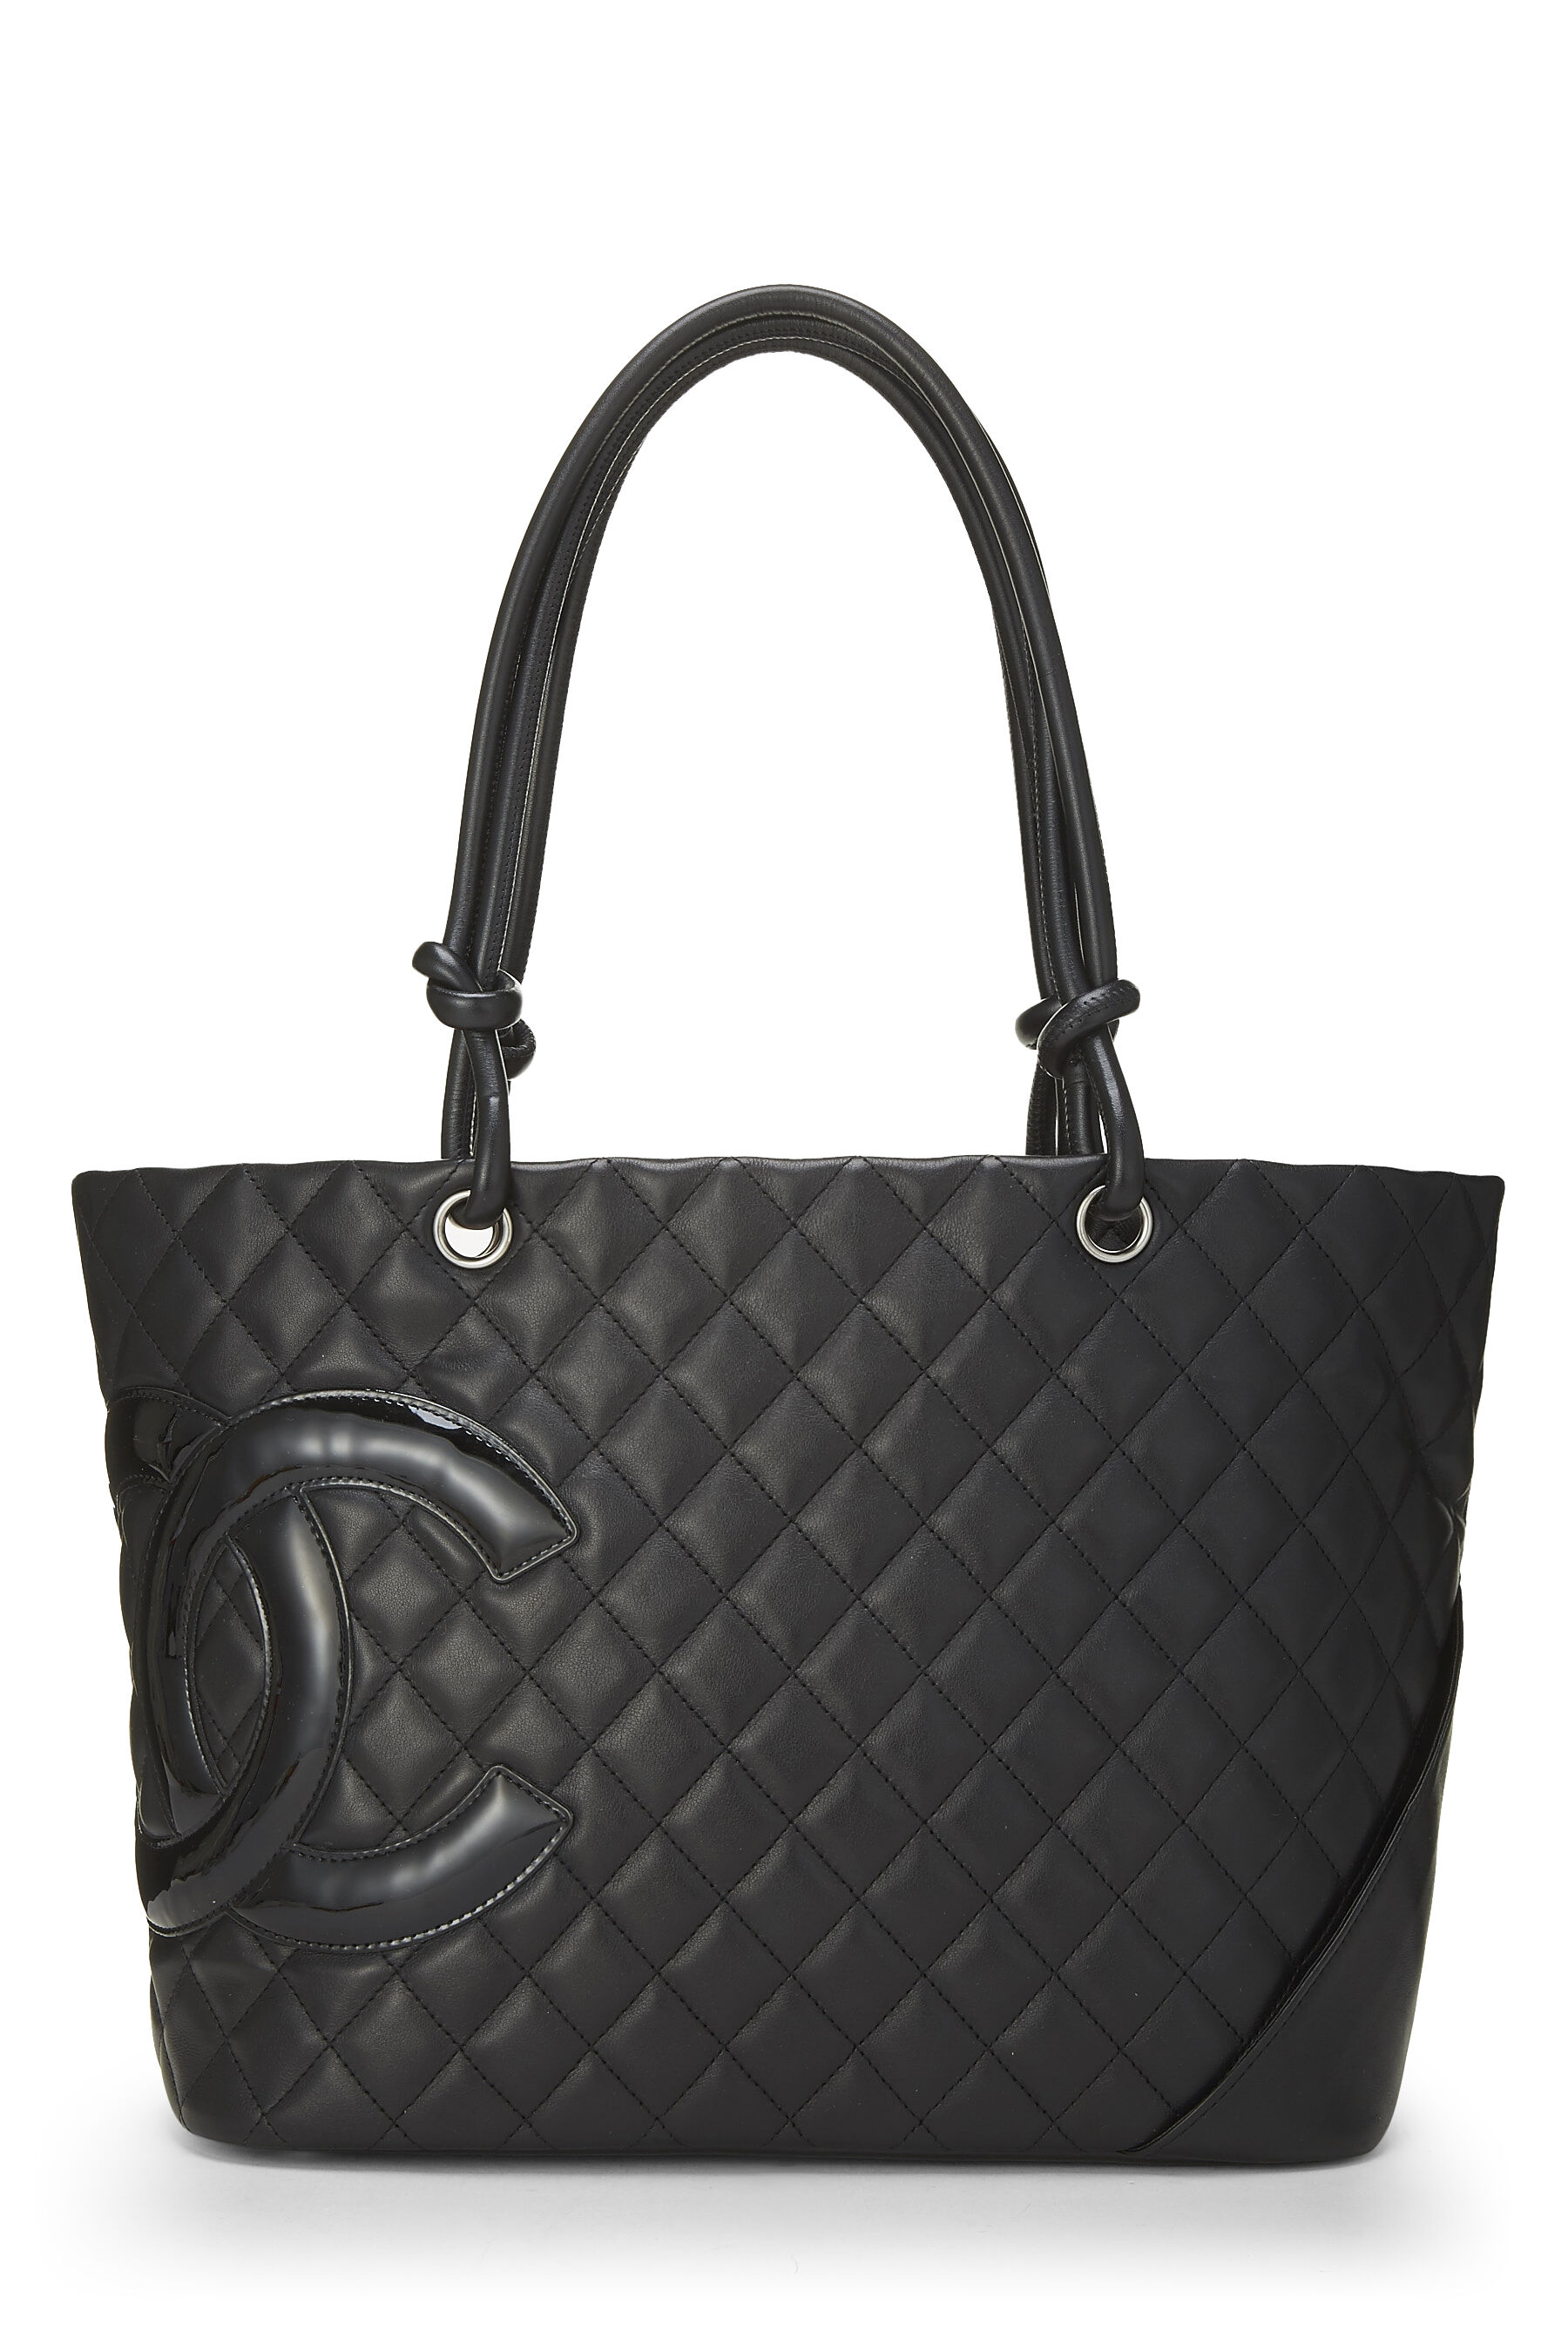 Chanel Black Quilted Calfskin Cambon Tote Large Q6BCHN1IK5011